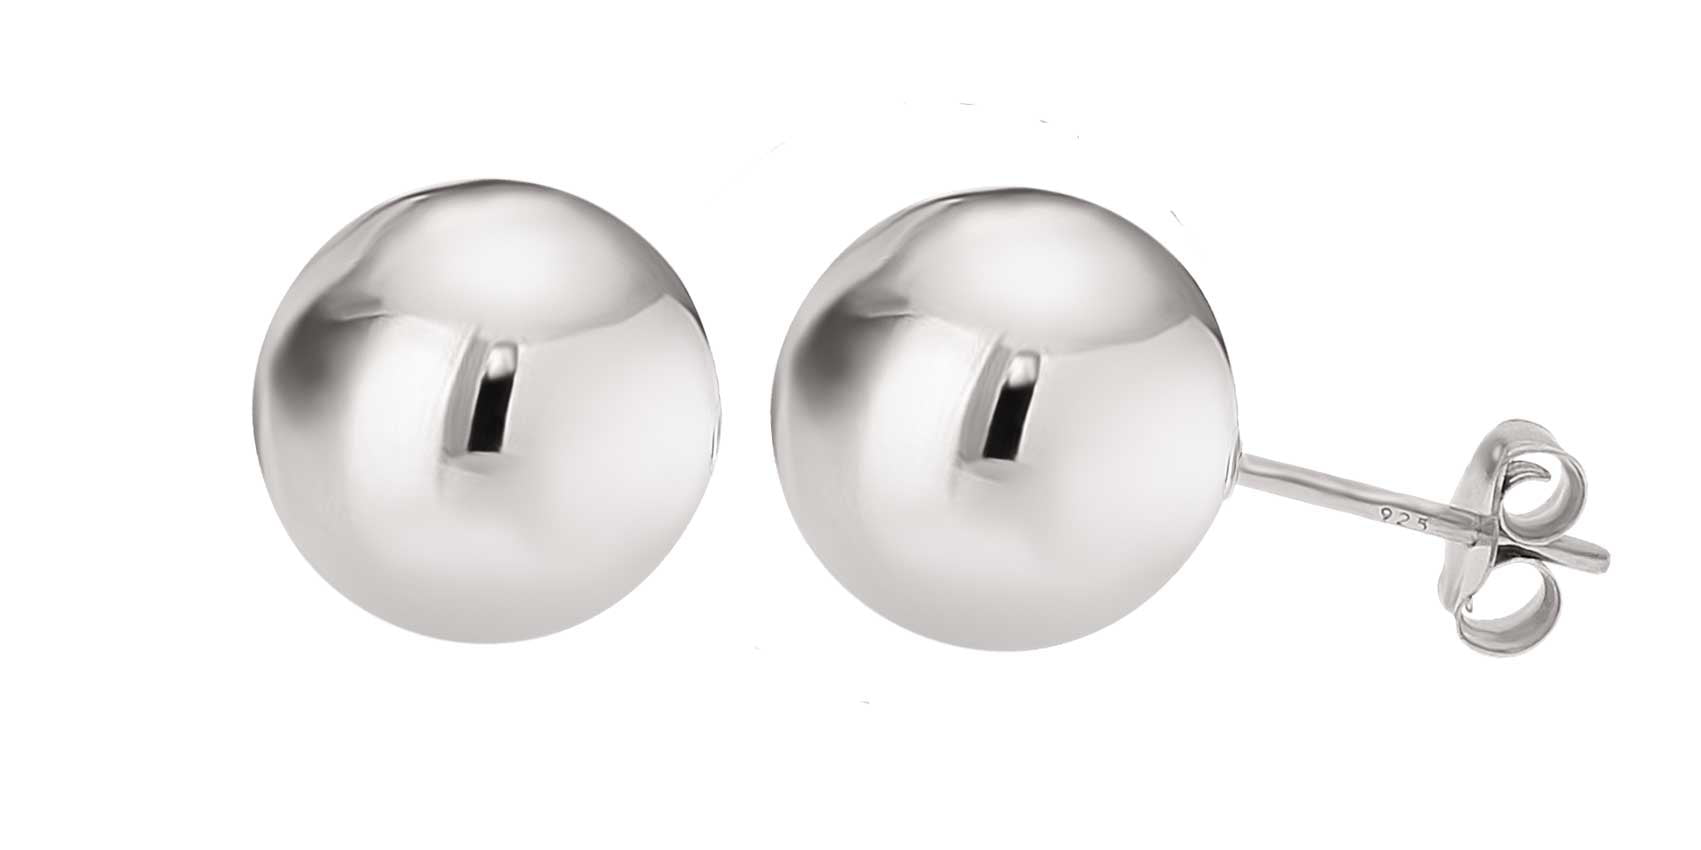 4mm 5mm Aeon Set of 3 Pairs of 925 Sterling Silver  Round Ball Studs 3mm